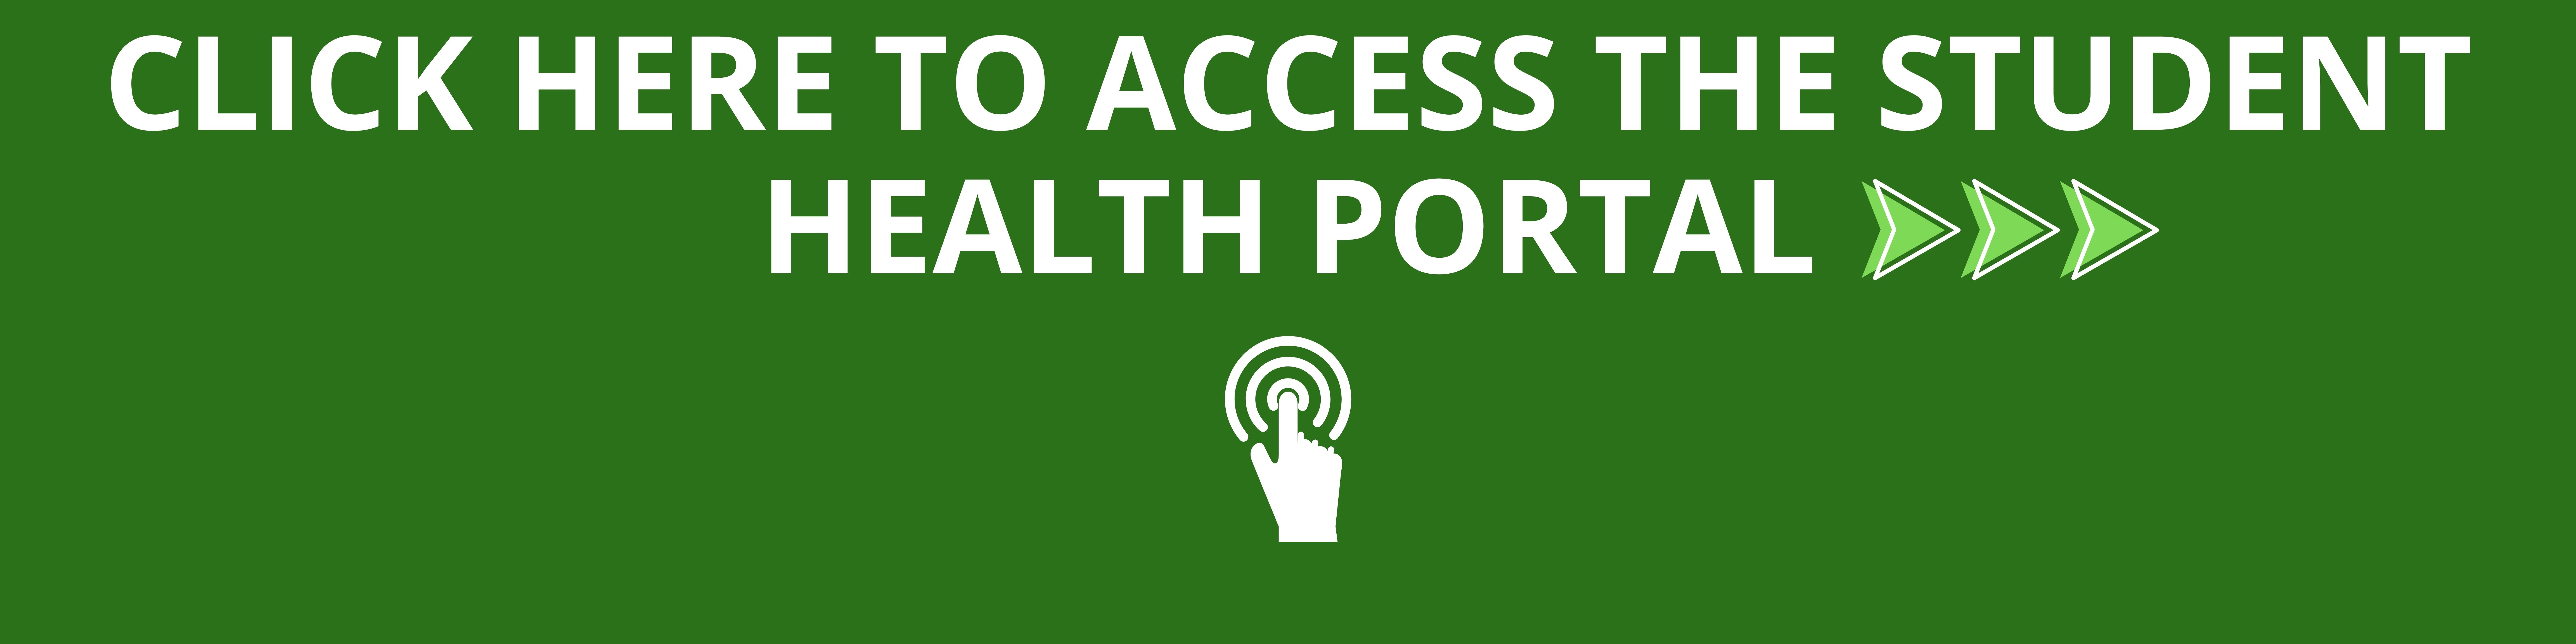 Click here to access the student health portal